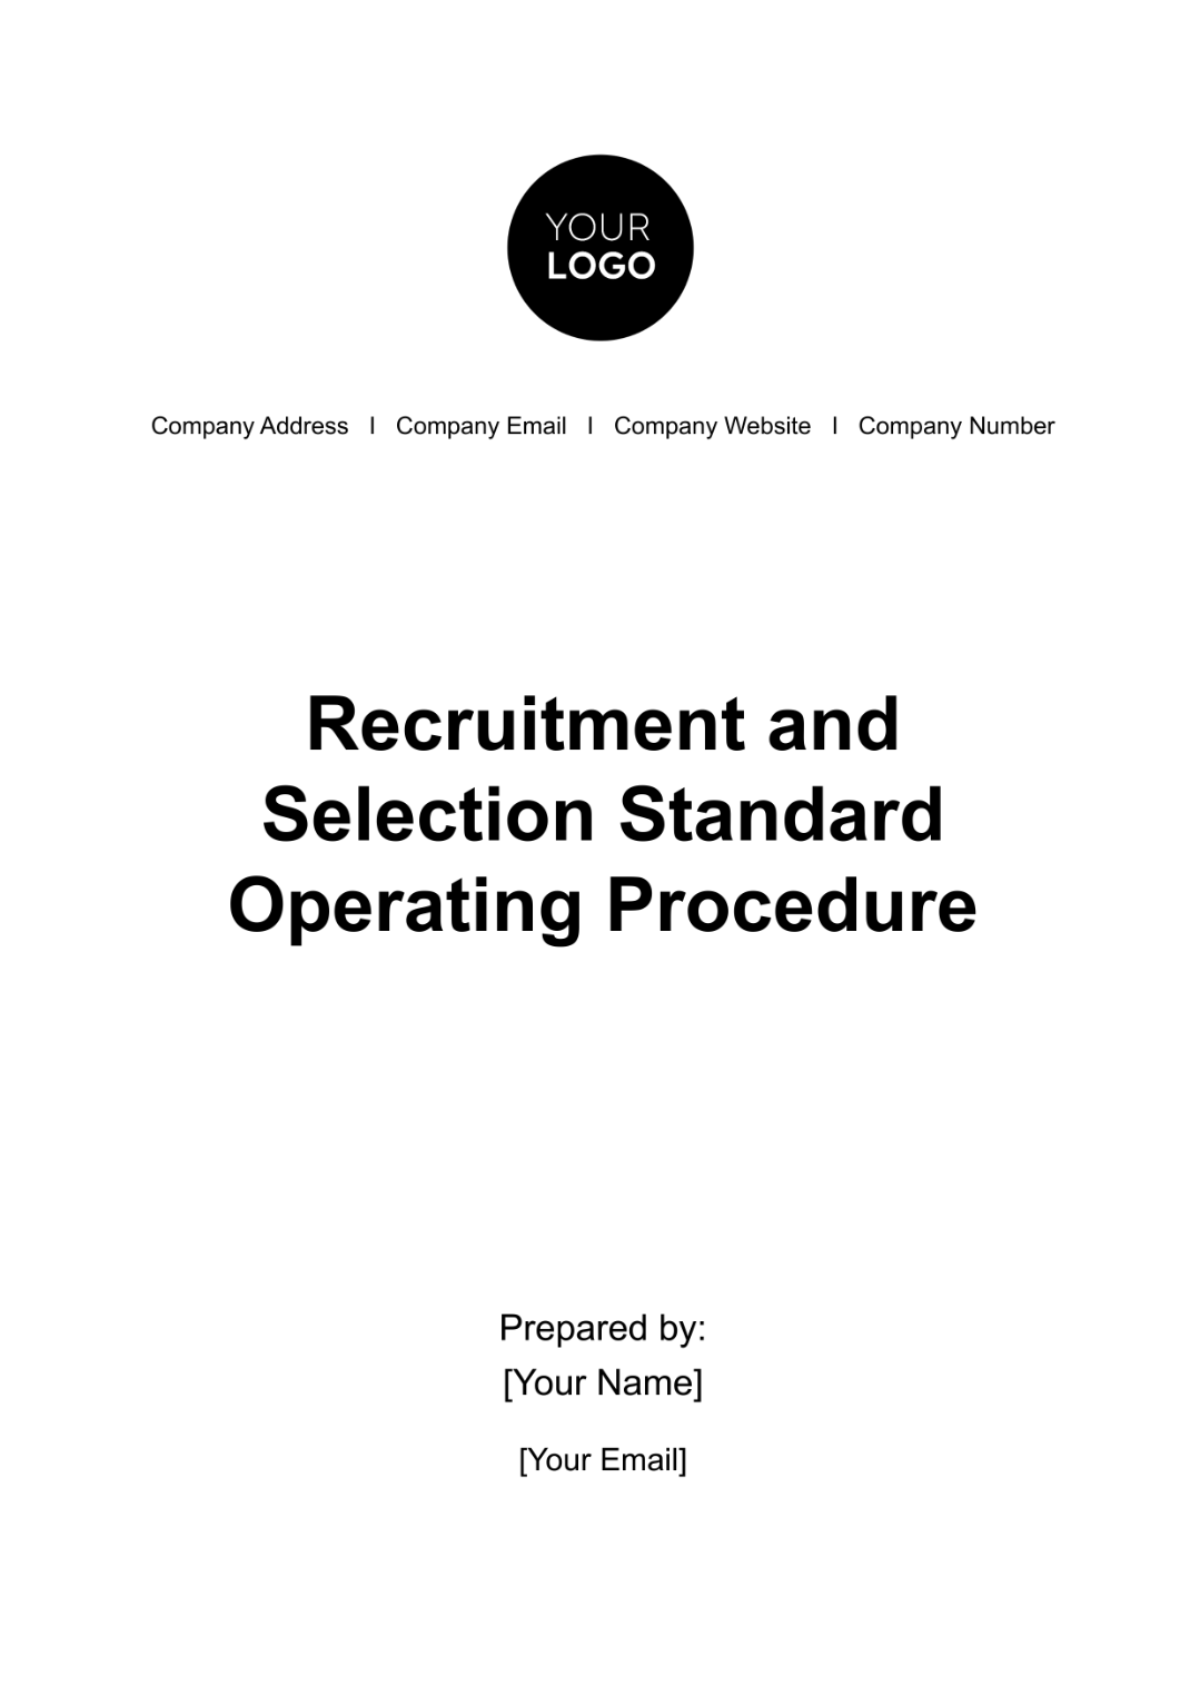 Free Recruitment and Selection Standard Operating Procedure (SOP) HR Template